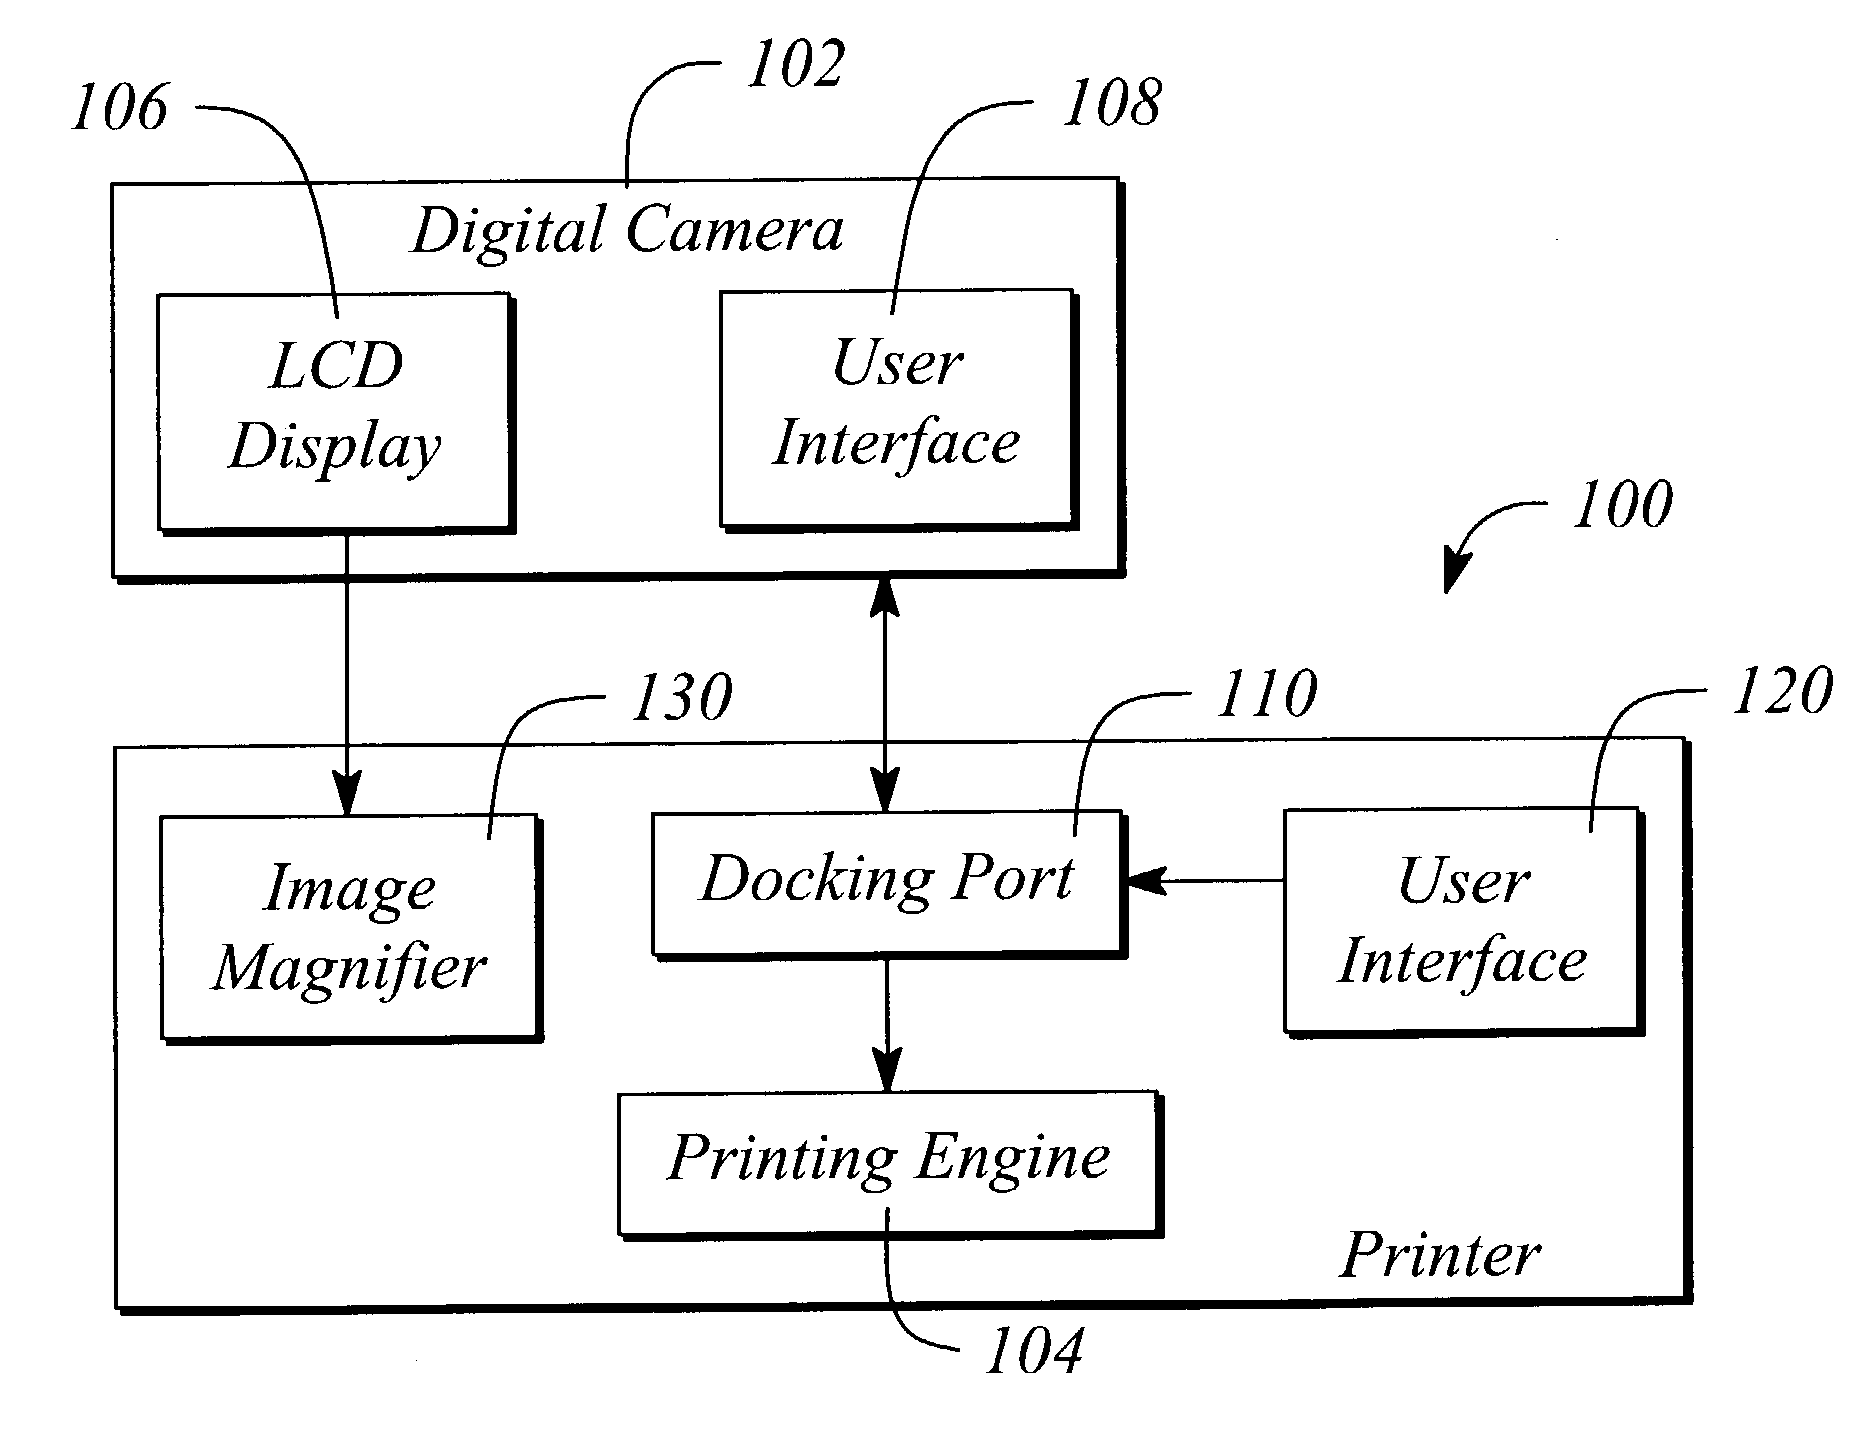 Printer and docking station having a digital camera docking port with an image magnifier